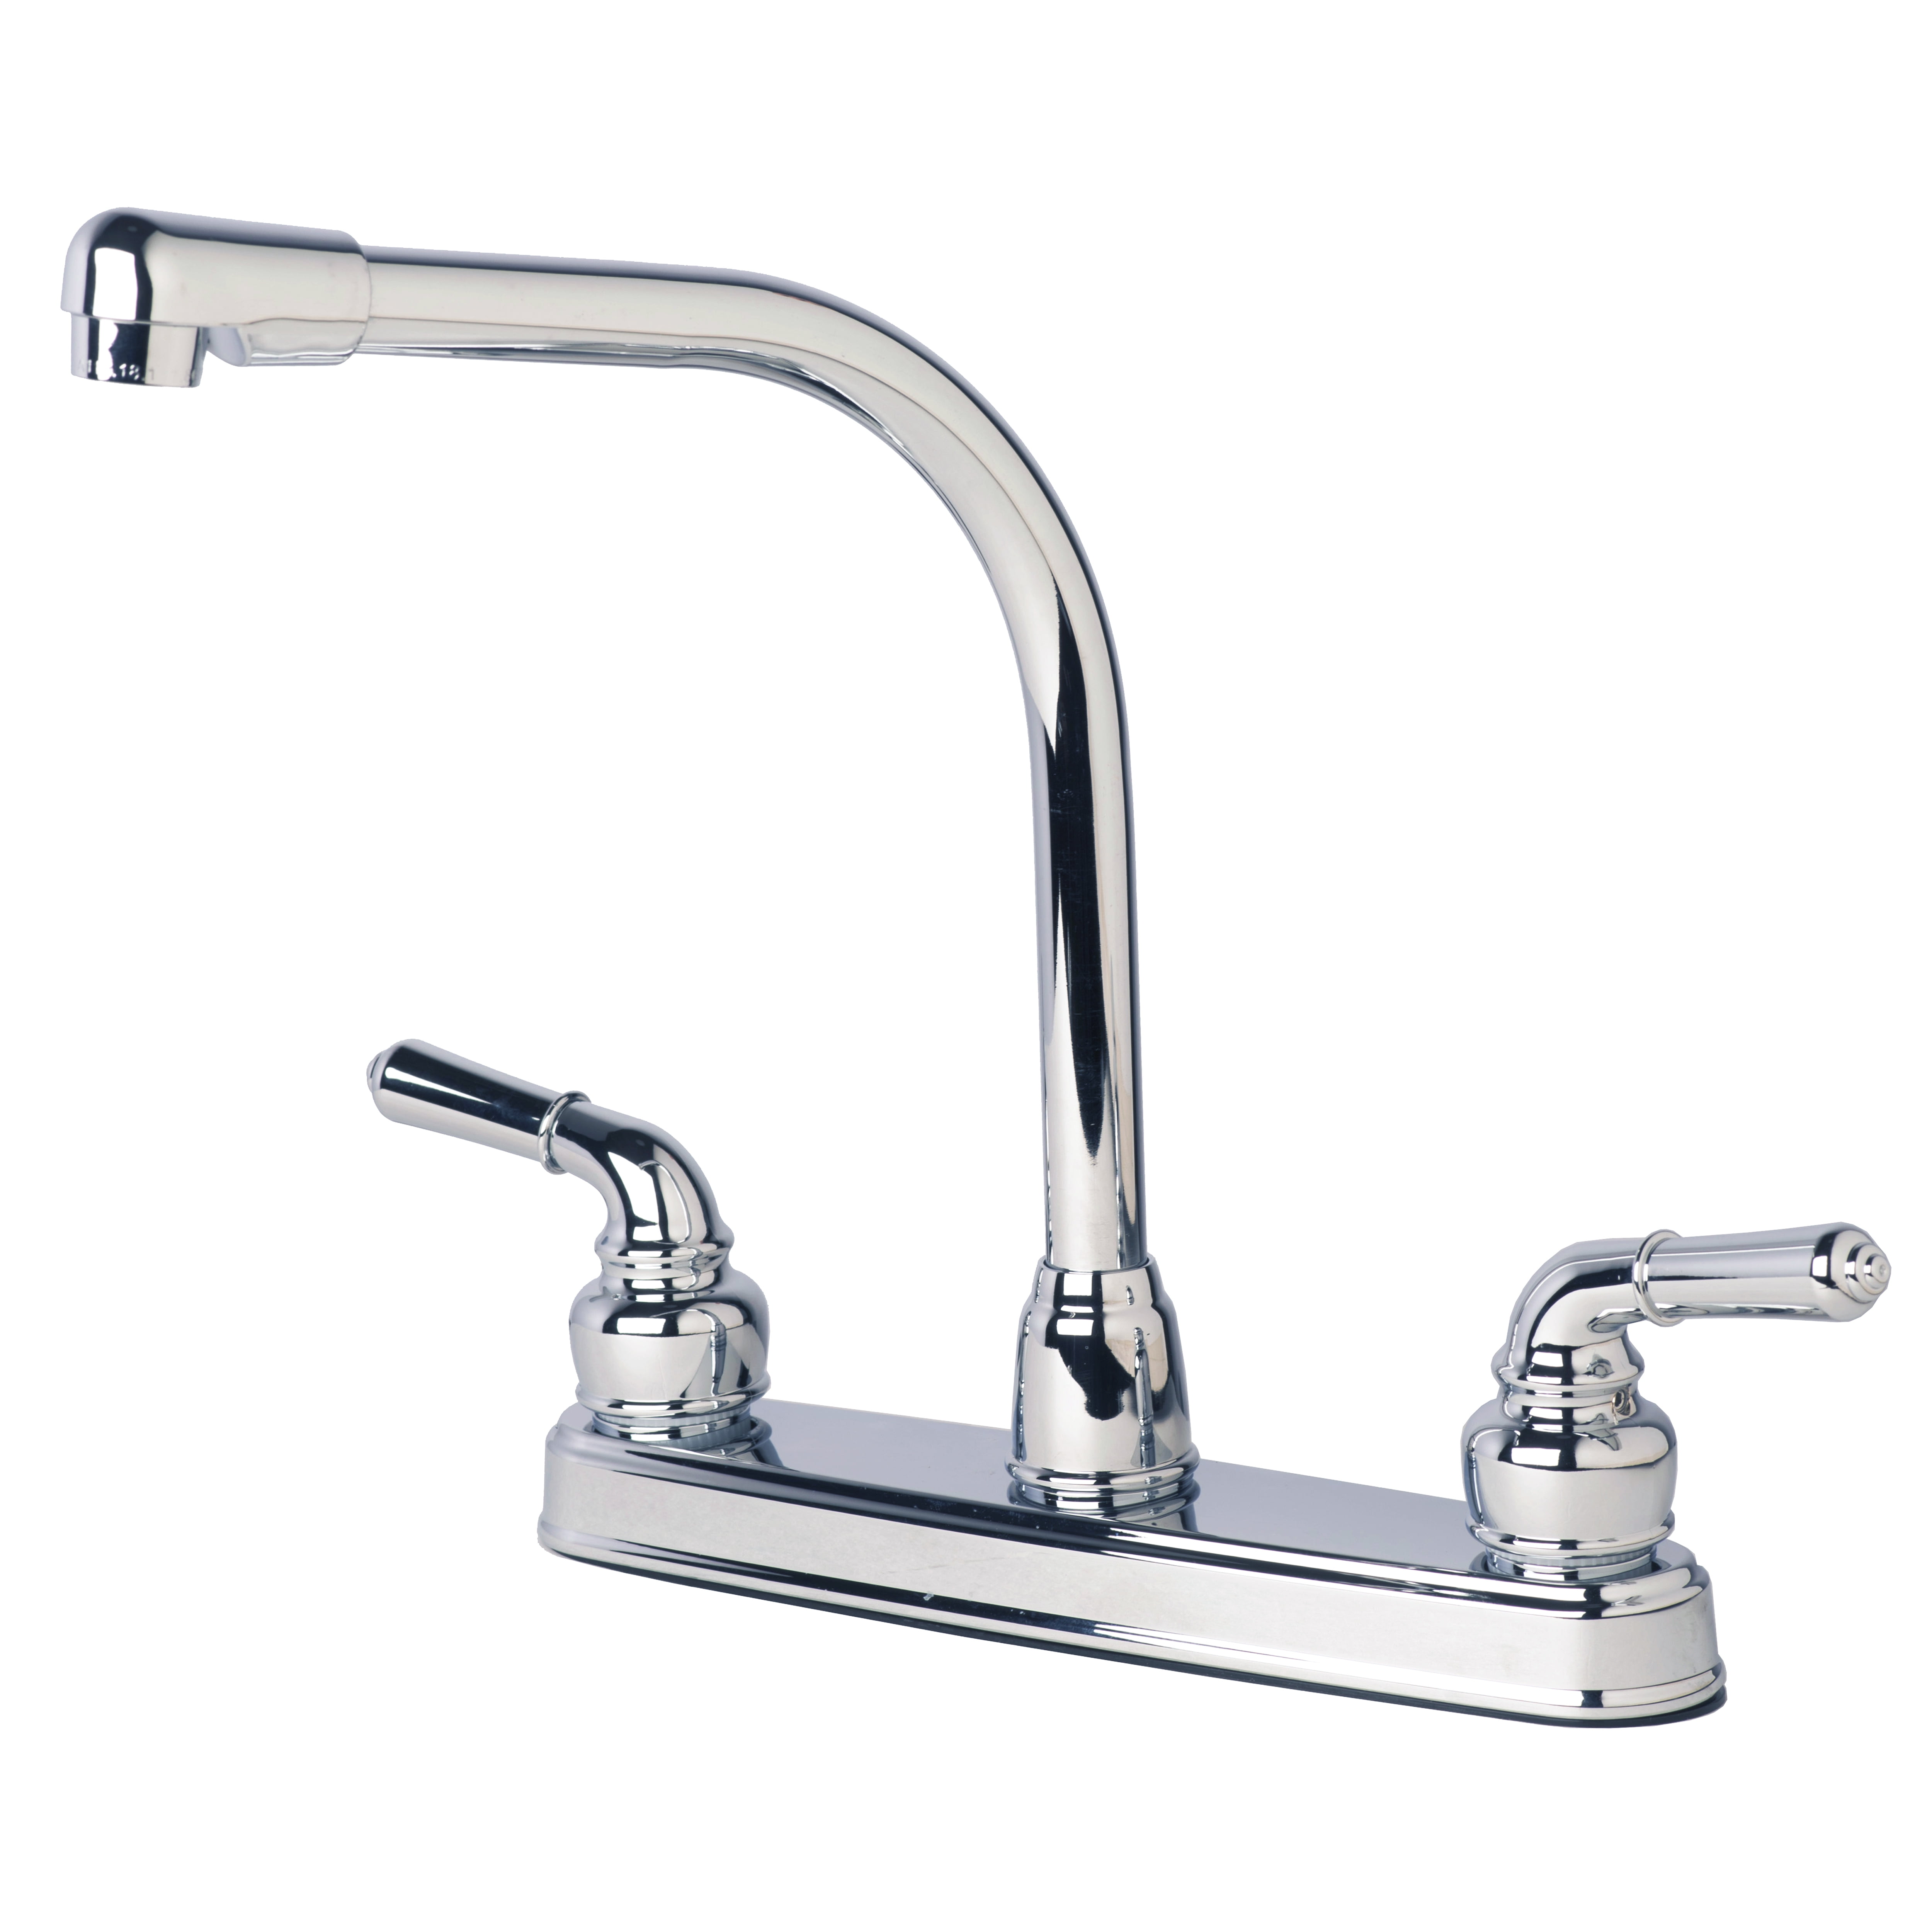 RV/Mobile Home Classic High Arc Swivel Bar Faucet Stainless Steel Finish 